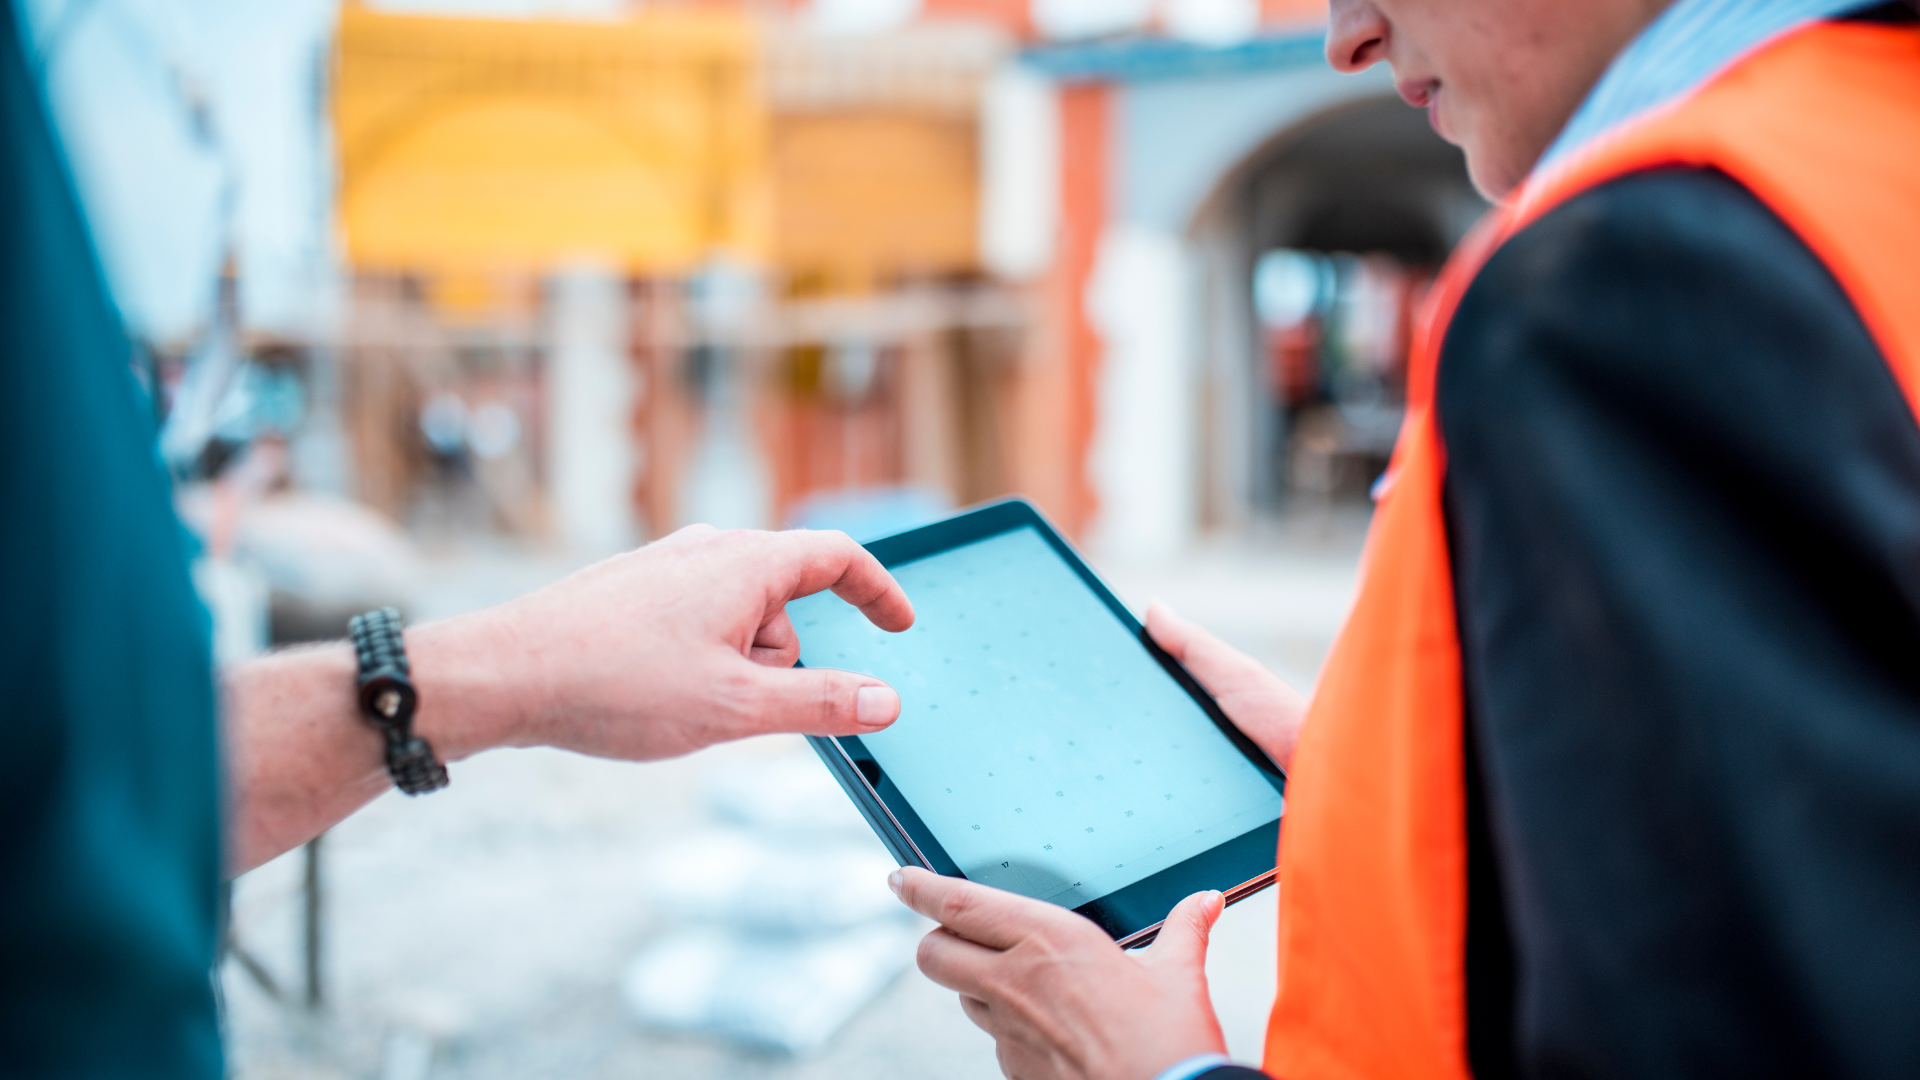 Construction workers on site looking at a calendar view on a tablet